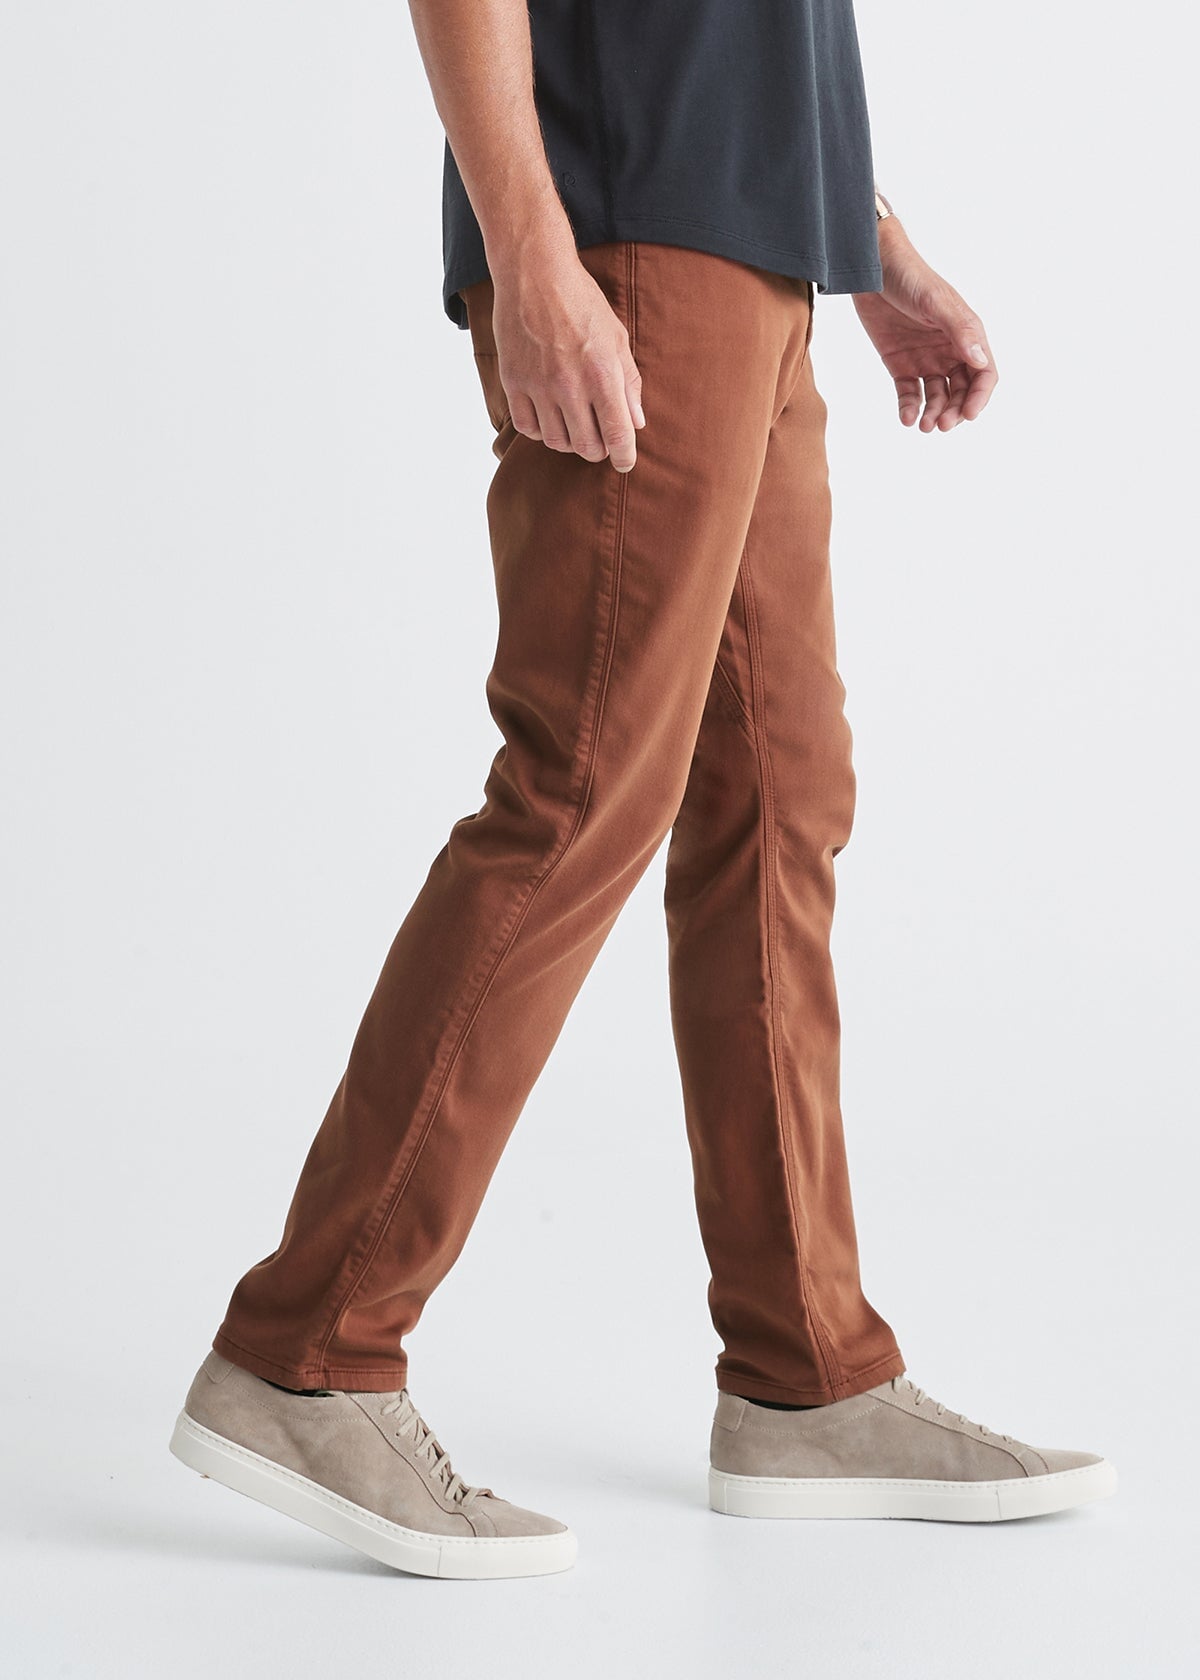 mens red-brown relaxed fit dress sweatpant side